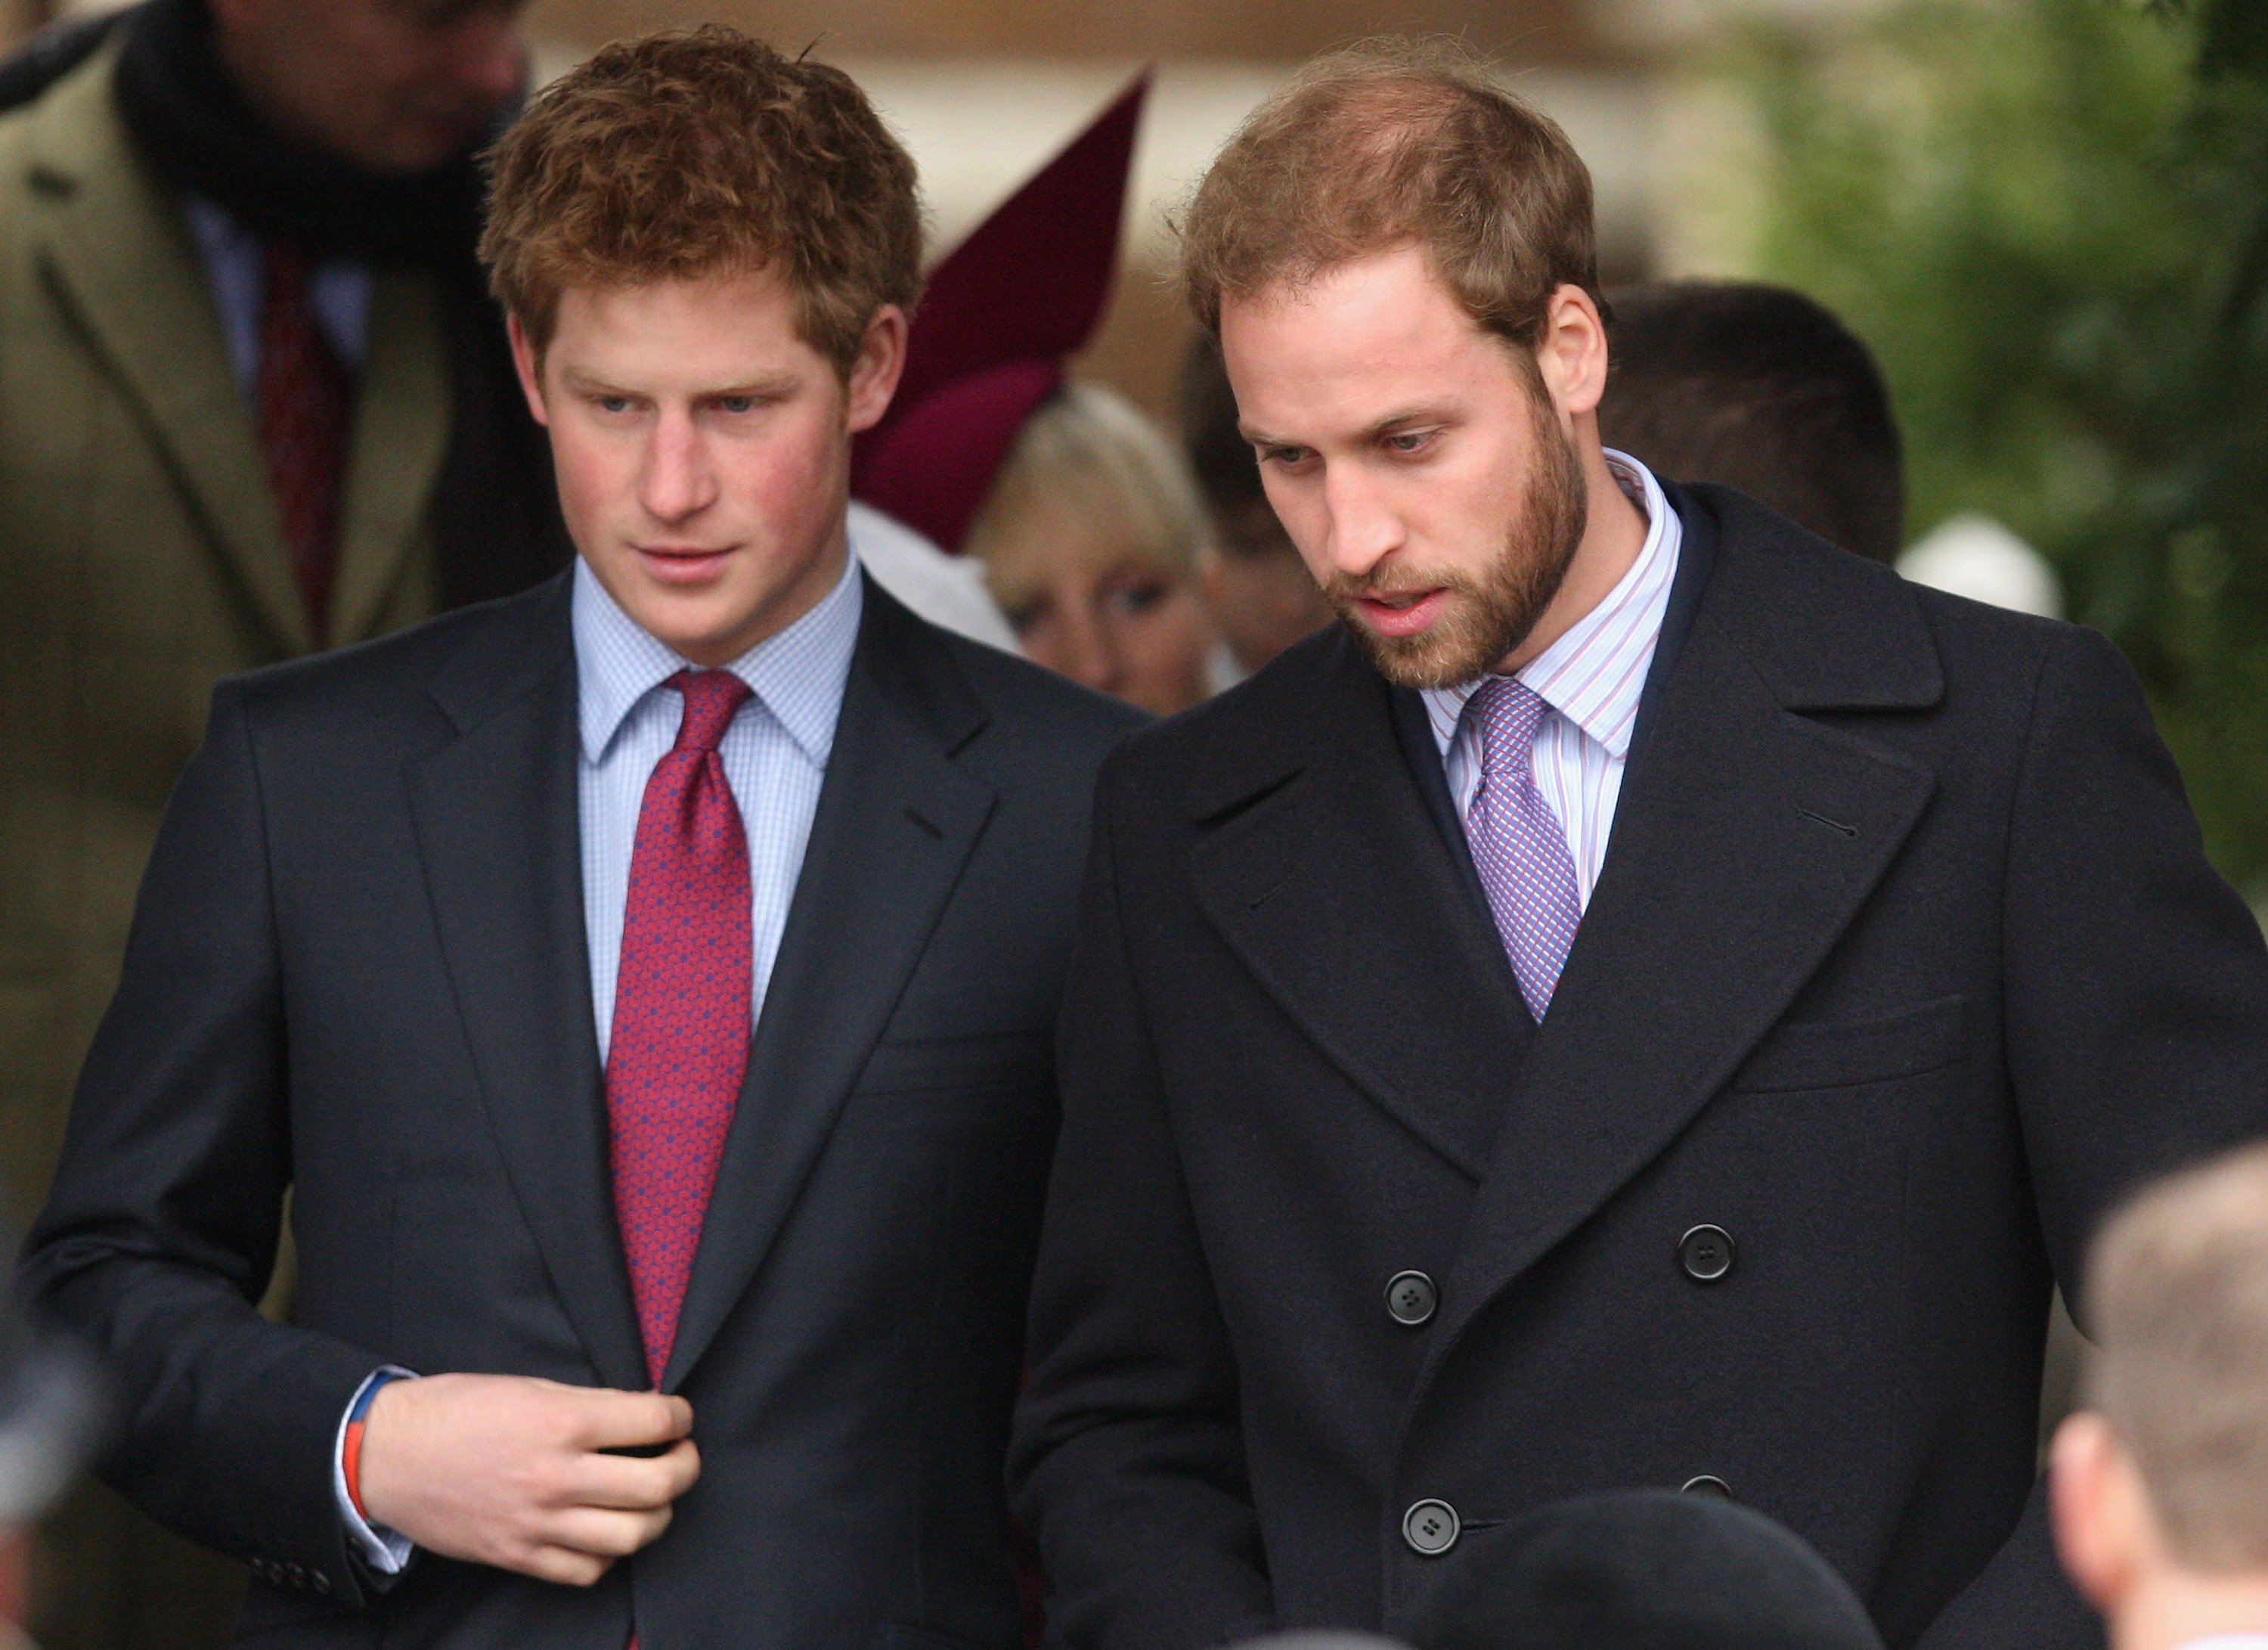 Prince Harry and Prince William attend the Christmas Day church service at St Mary's Church on December 25, 2008, in Sandringham, England. | Source: Getty Images